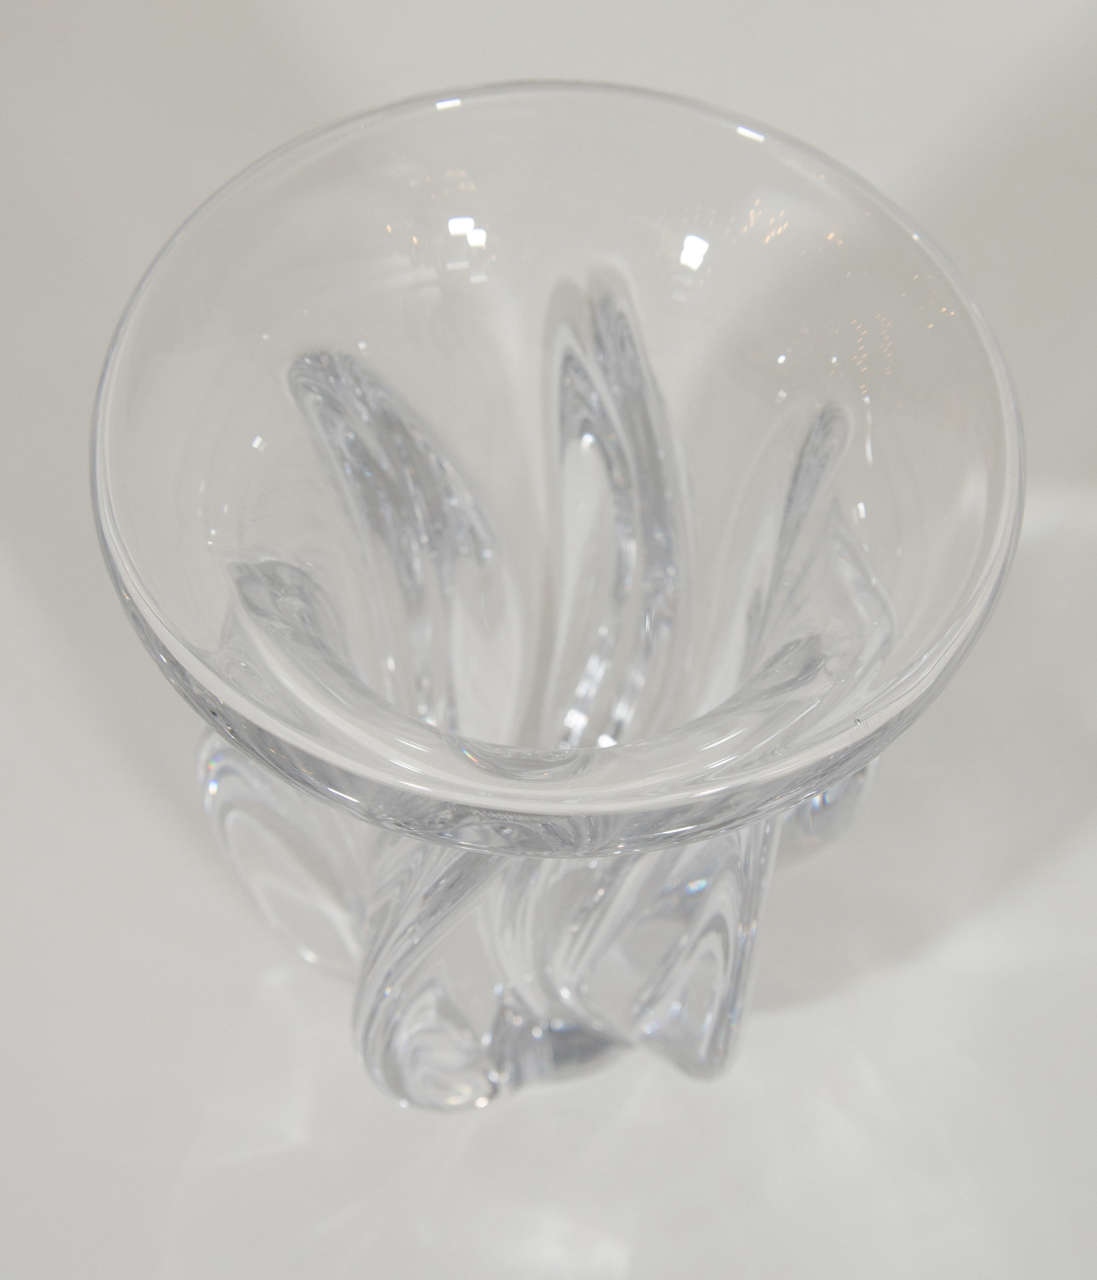 Symmetrical hand blown crystal vase. The body of the vase is a fluted form with a protruding lip and swirled fins design. Creates beautiful patterns of light on any surface. Signed Art Vannes.